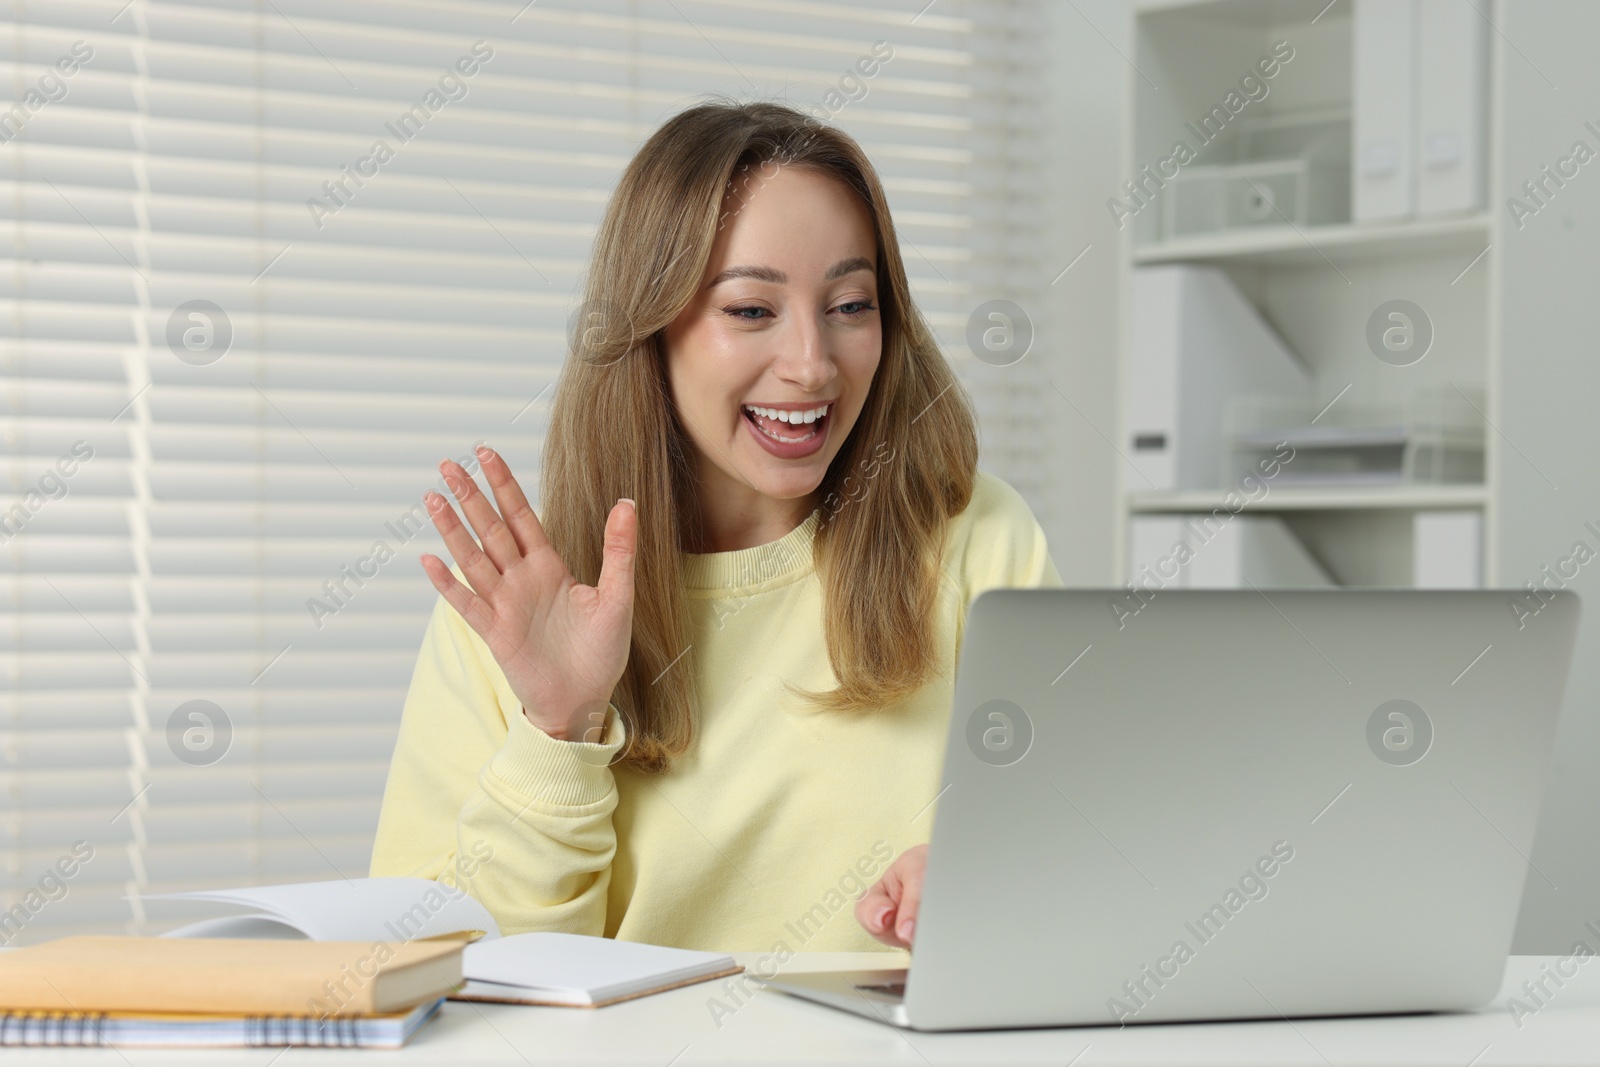 Photo of Young woman waving hello during video chat via laptop at white table indoors